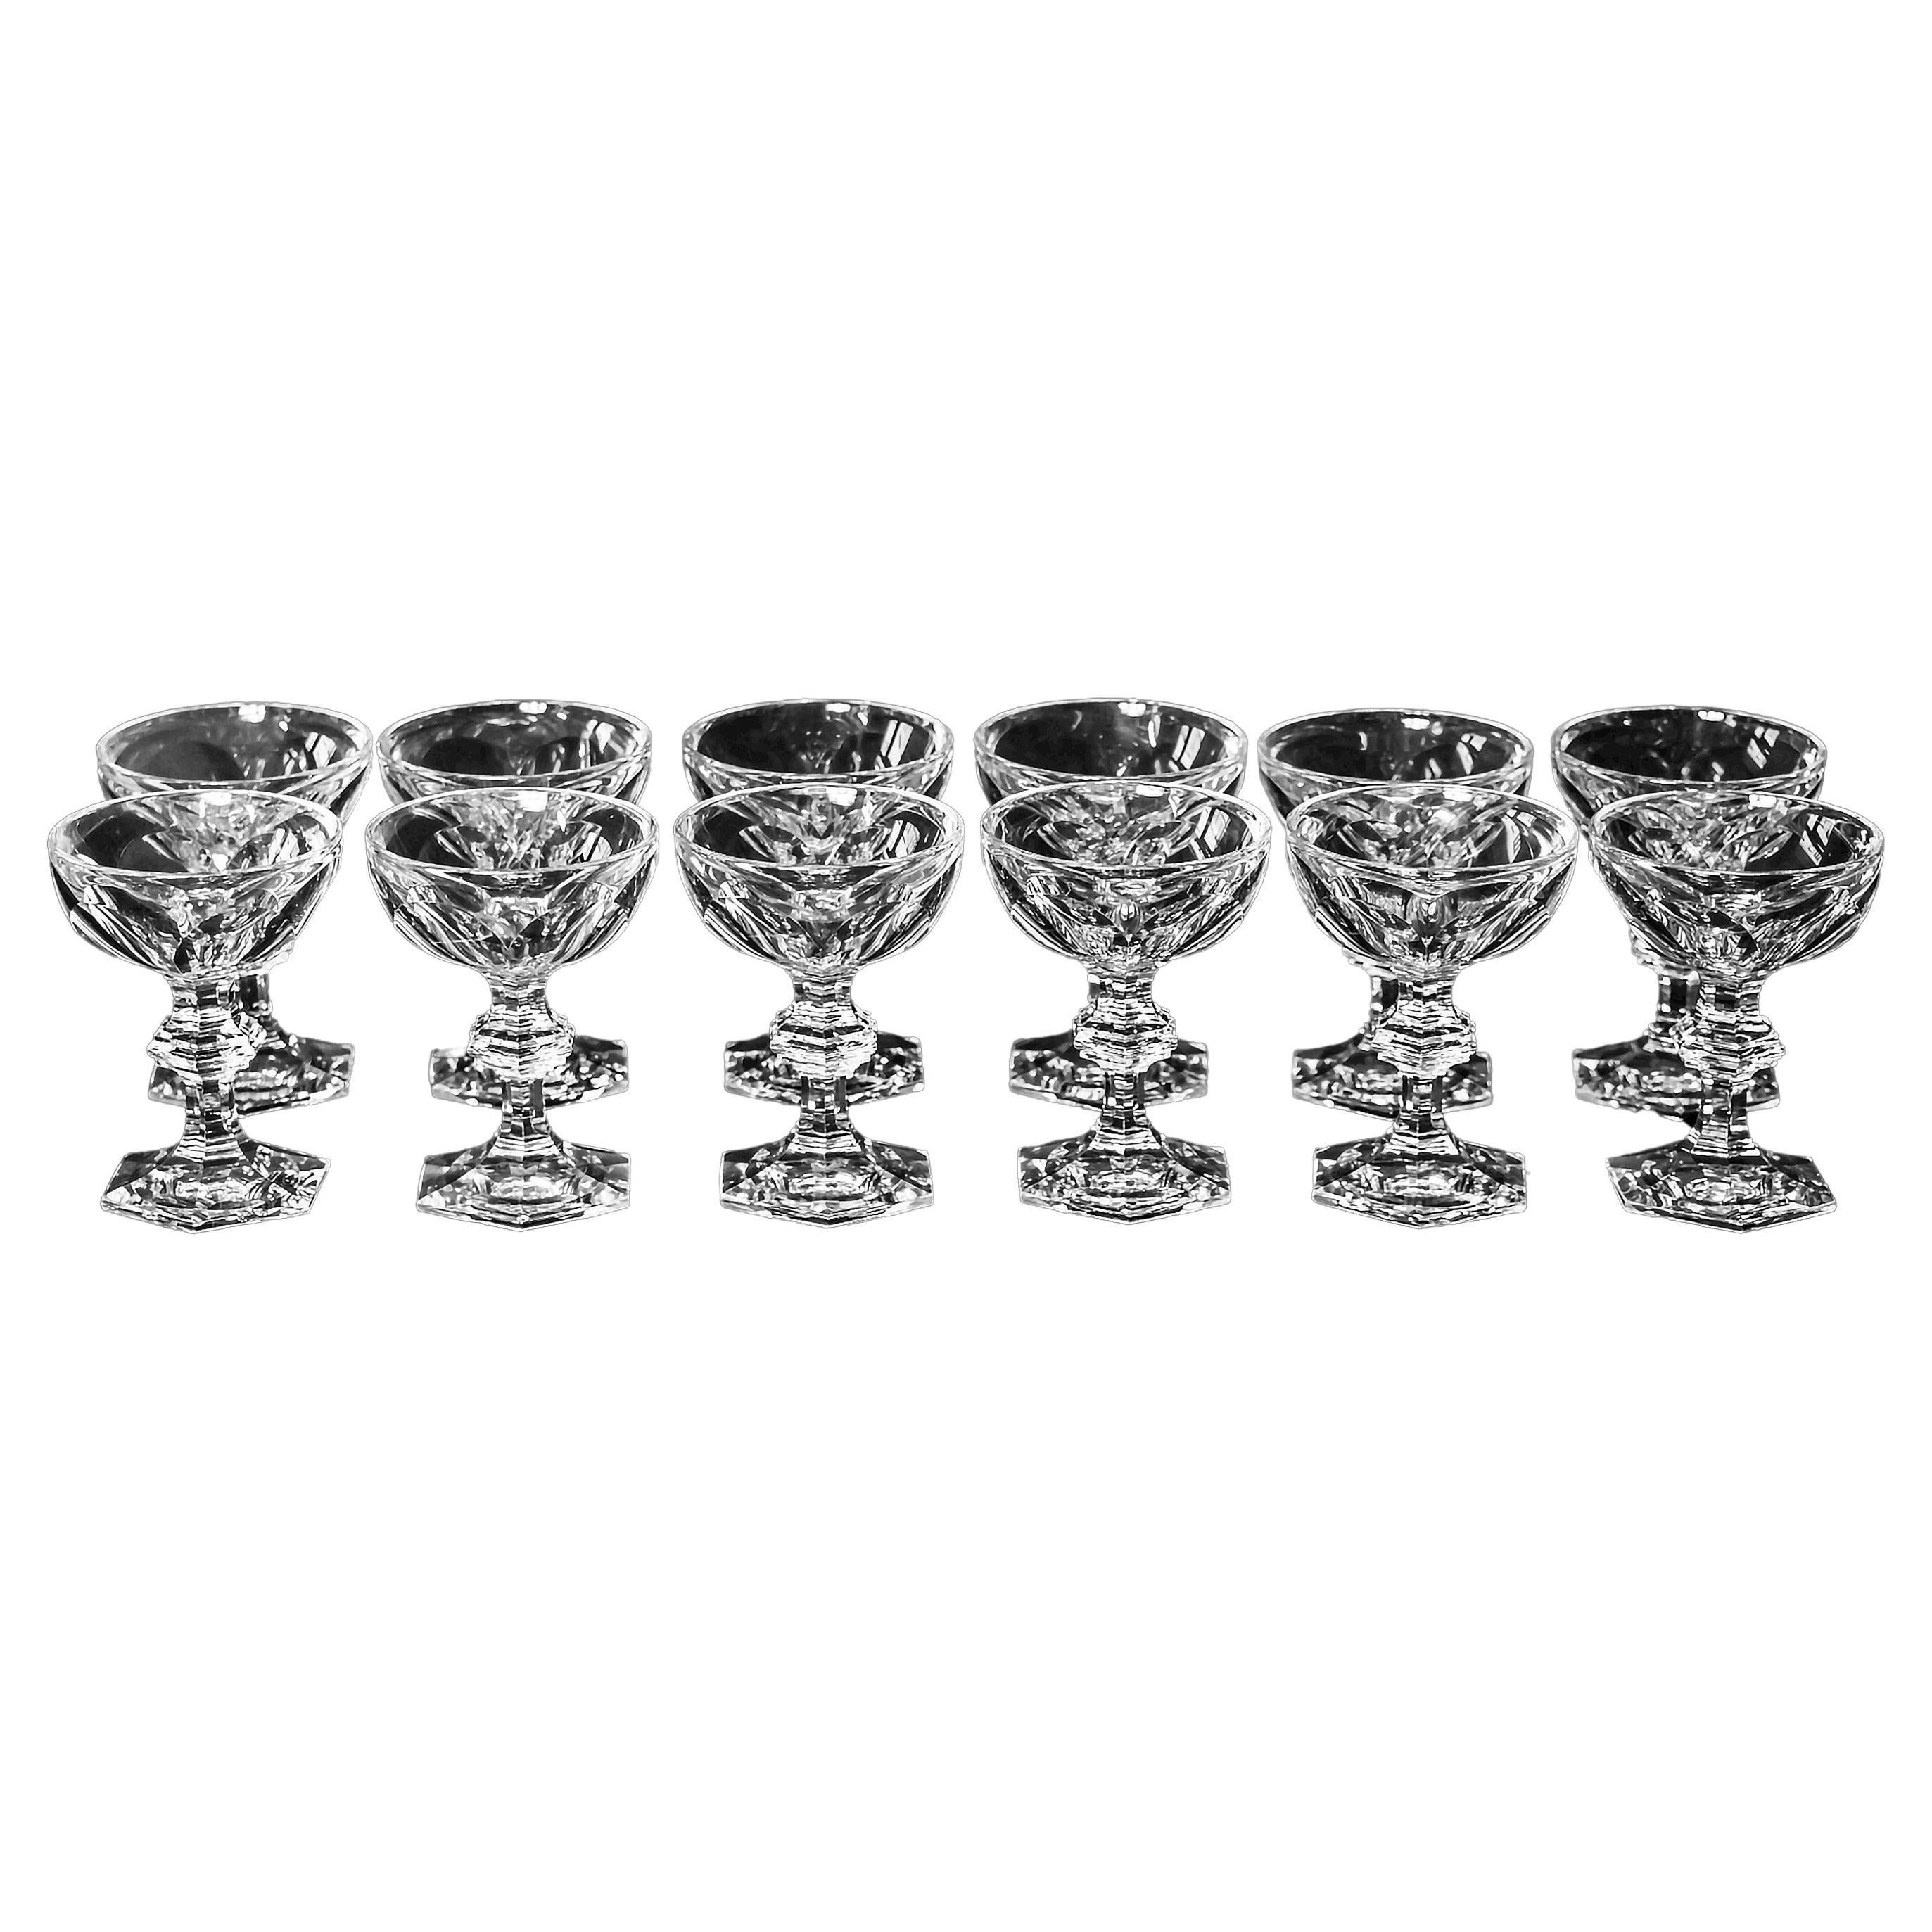 Set of 12 Baccarat Harcourt 1841 collection champagne coupes.
Marked on the bottom.
Excellent /like new condition.

